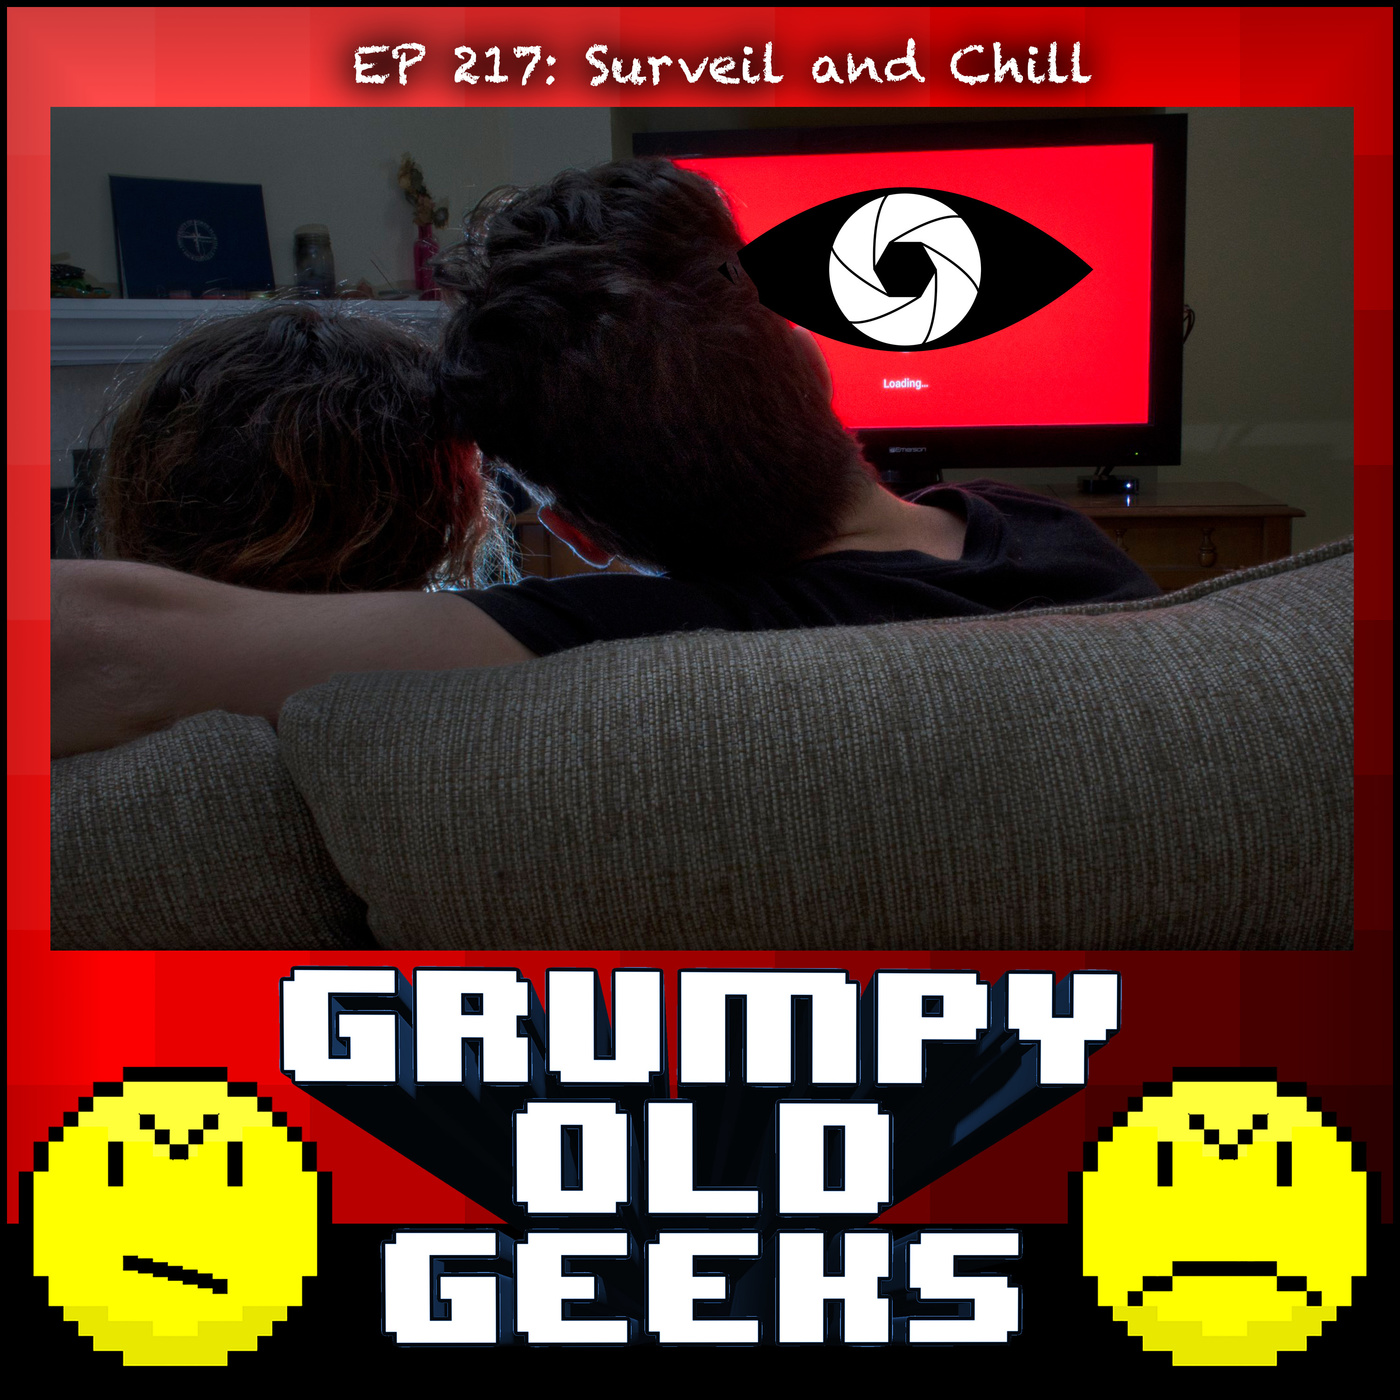 217: Surveil and Chill